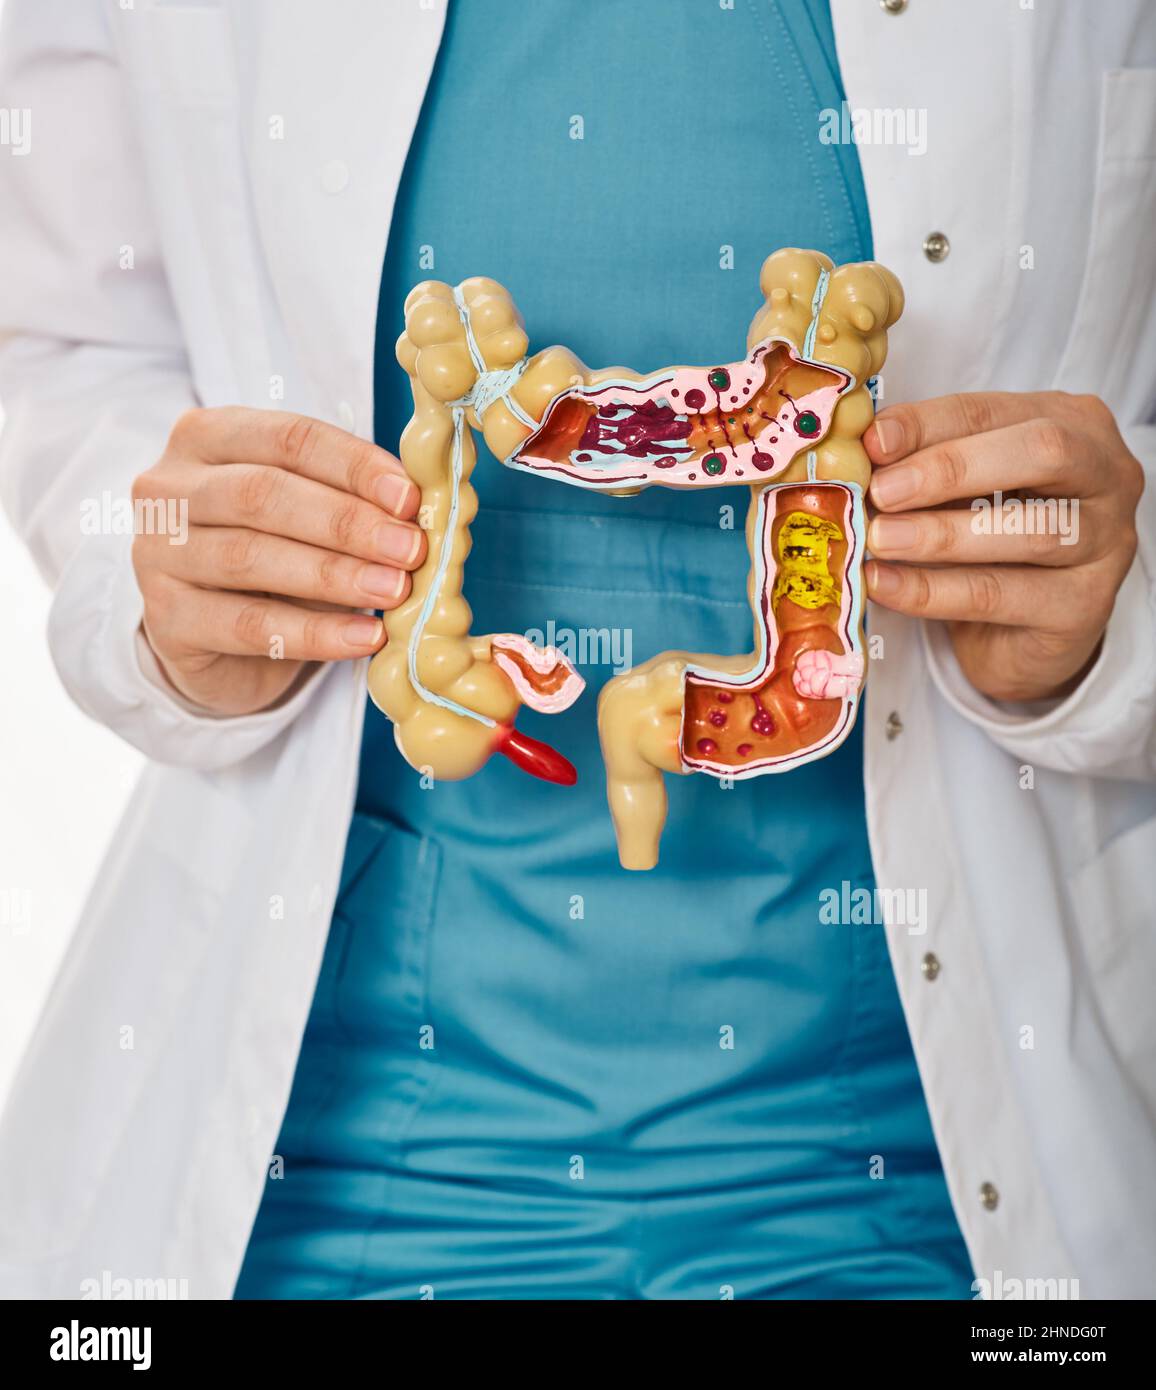 Treatment of colitis, flatulence, indigestion in healthcare. Anatomical intestines model with pathology in doctor hands, close-up Stock Photo